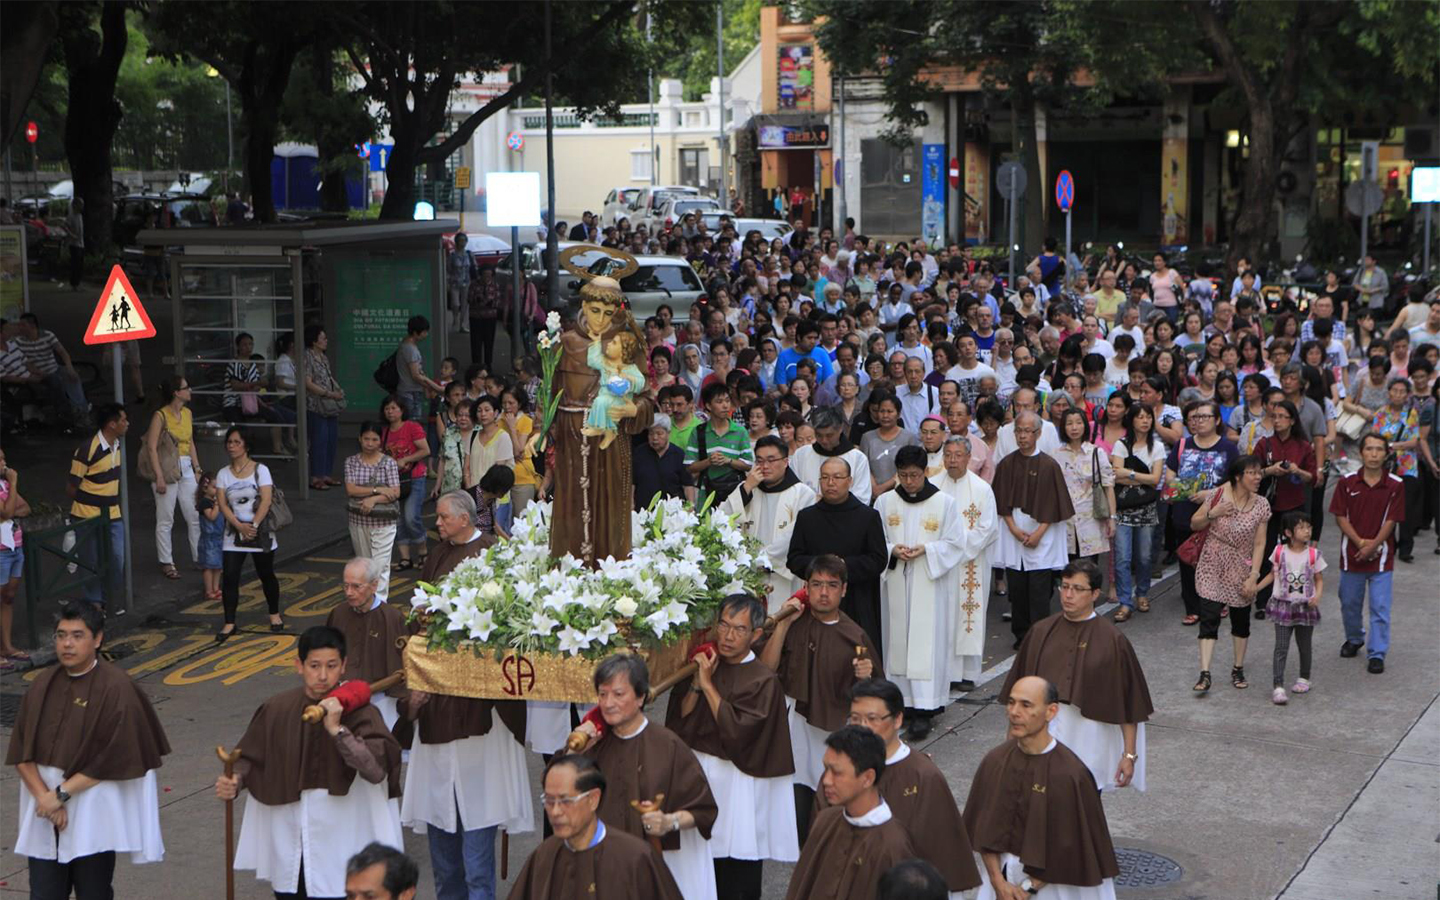 The Procession of Saint Anthony will be held this weekend